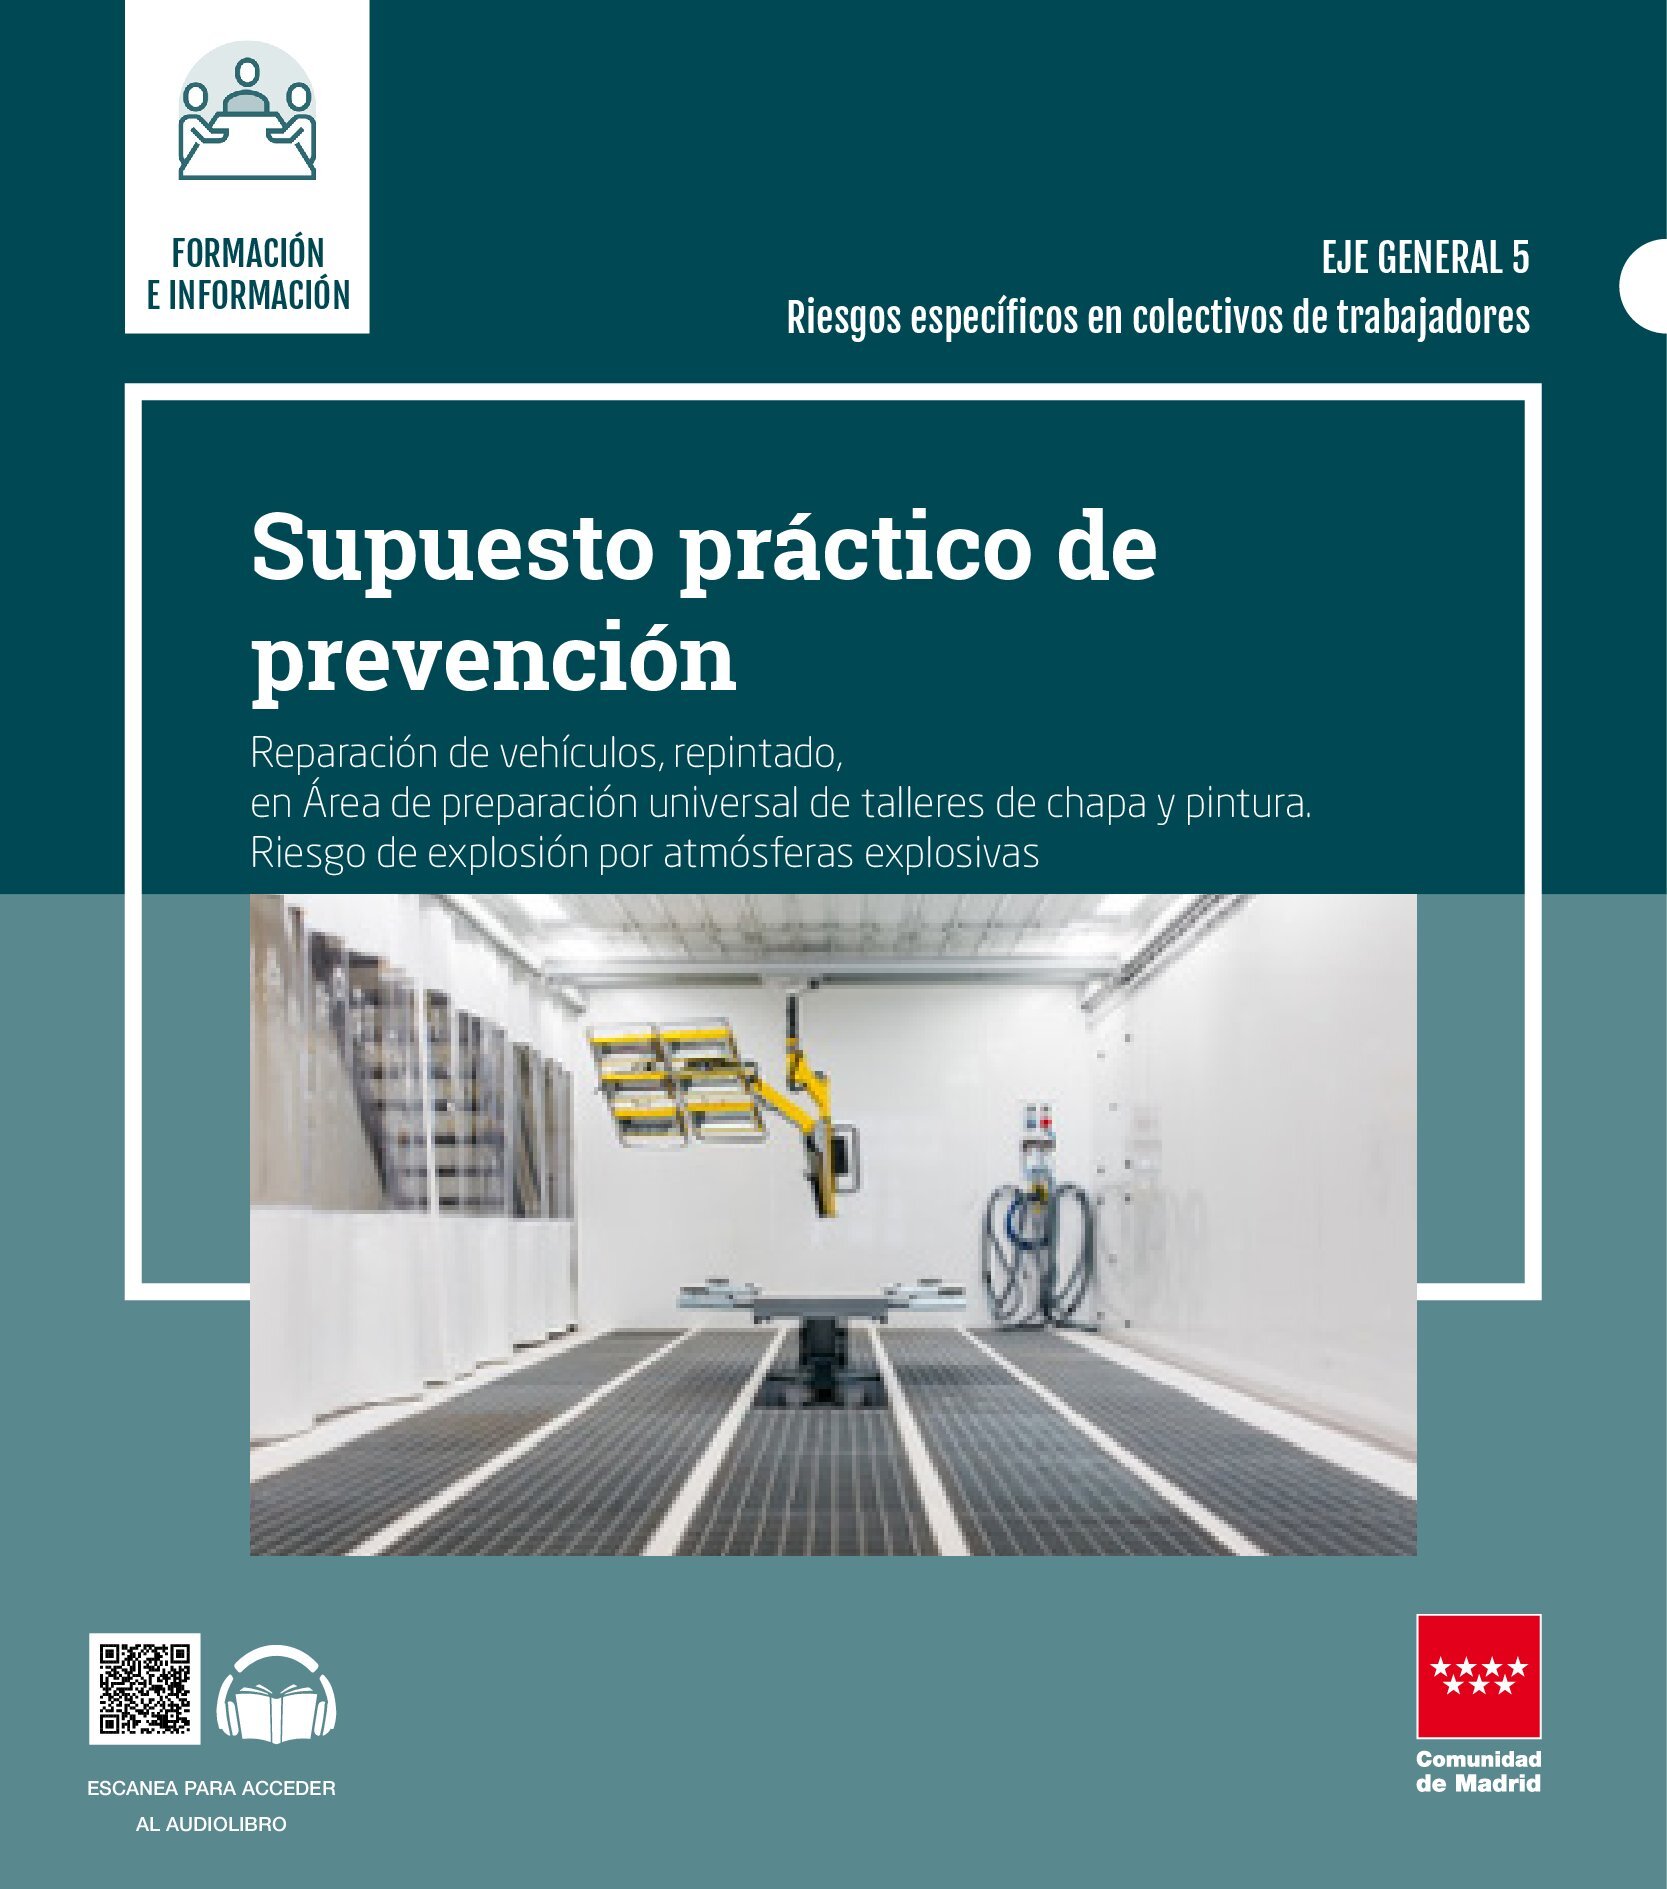 Cover of Practical assumption of prevention. Vehicle repair, repainting, in the universal preparation area of ​​body and paint shops. Risk of explosion due to explosive atmospheres